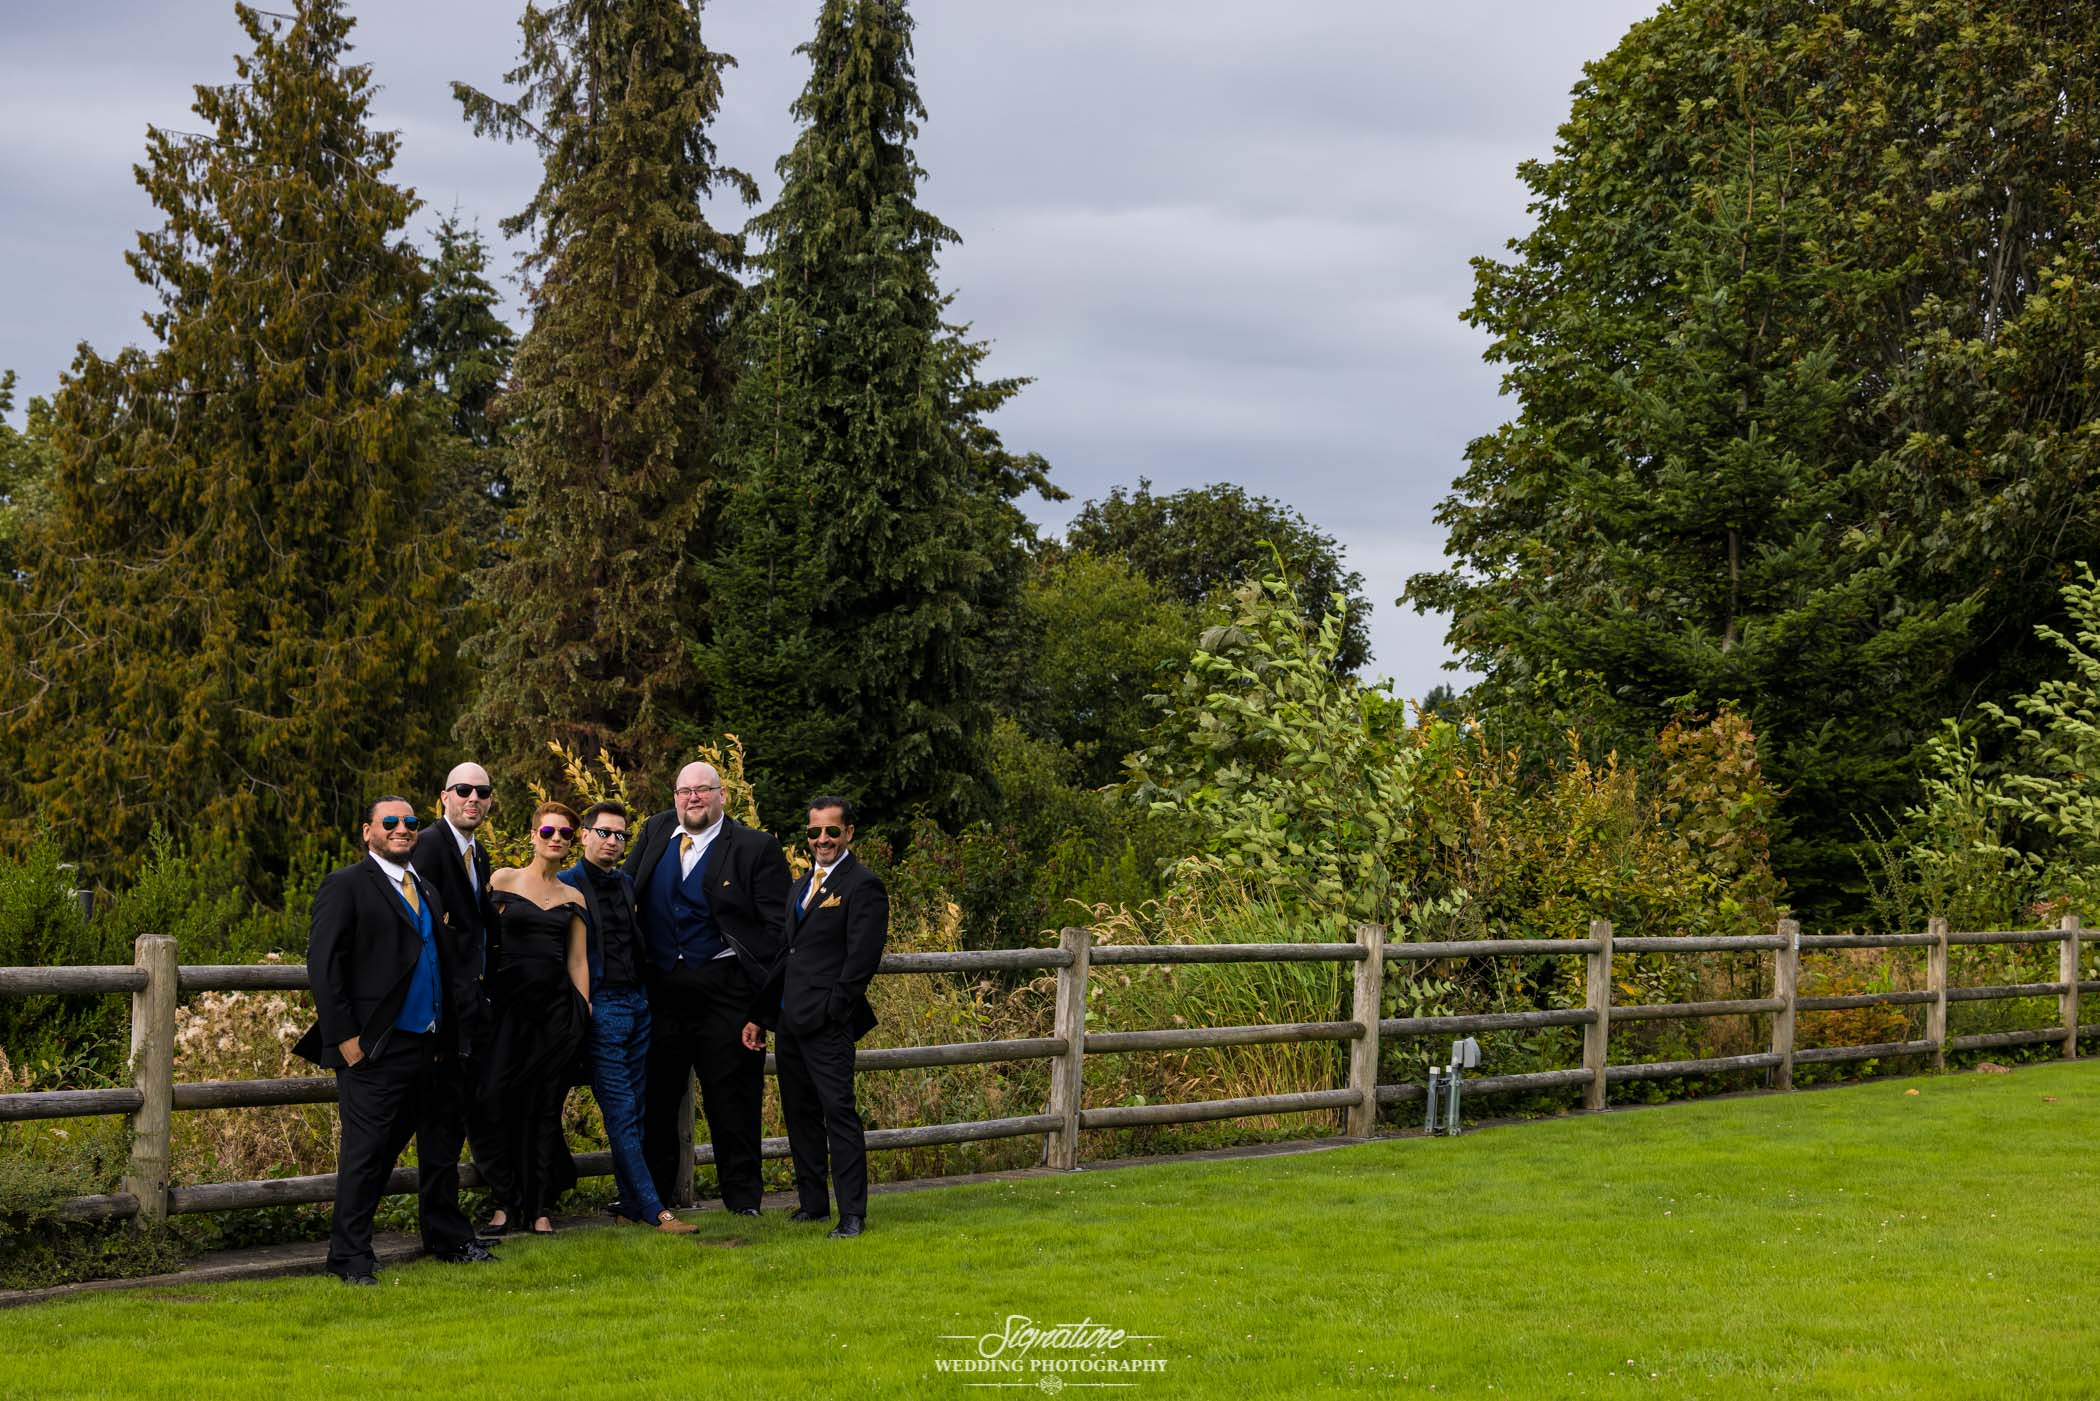 Groom with groomspeople